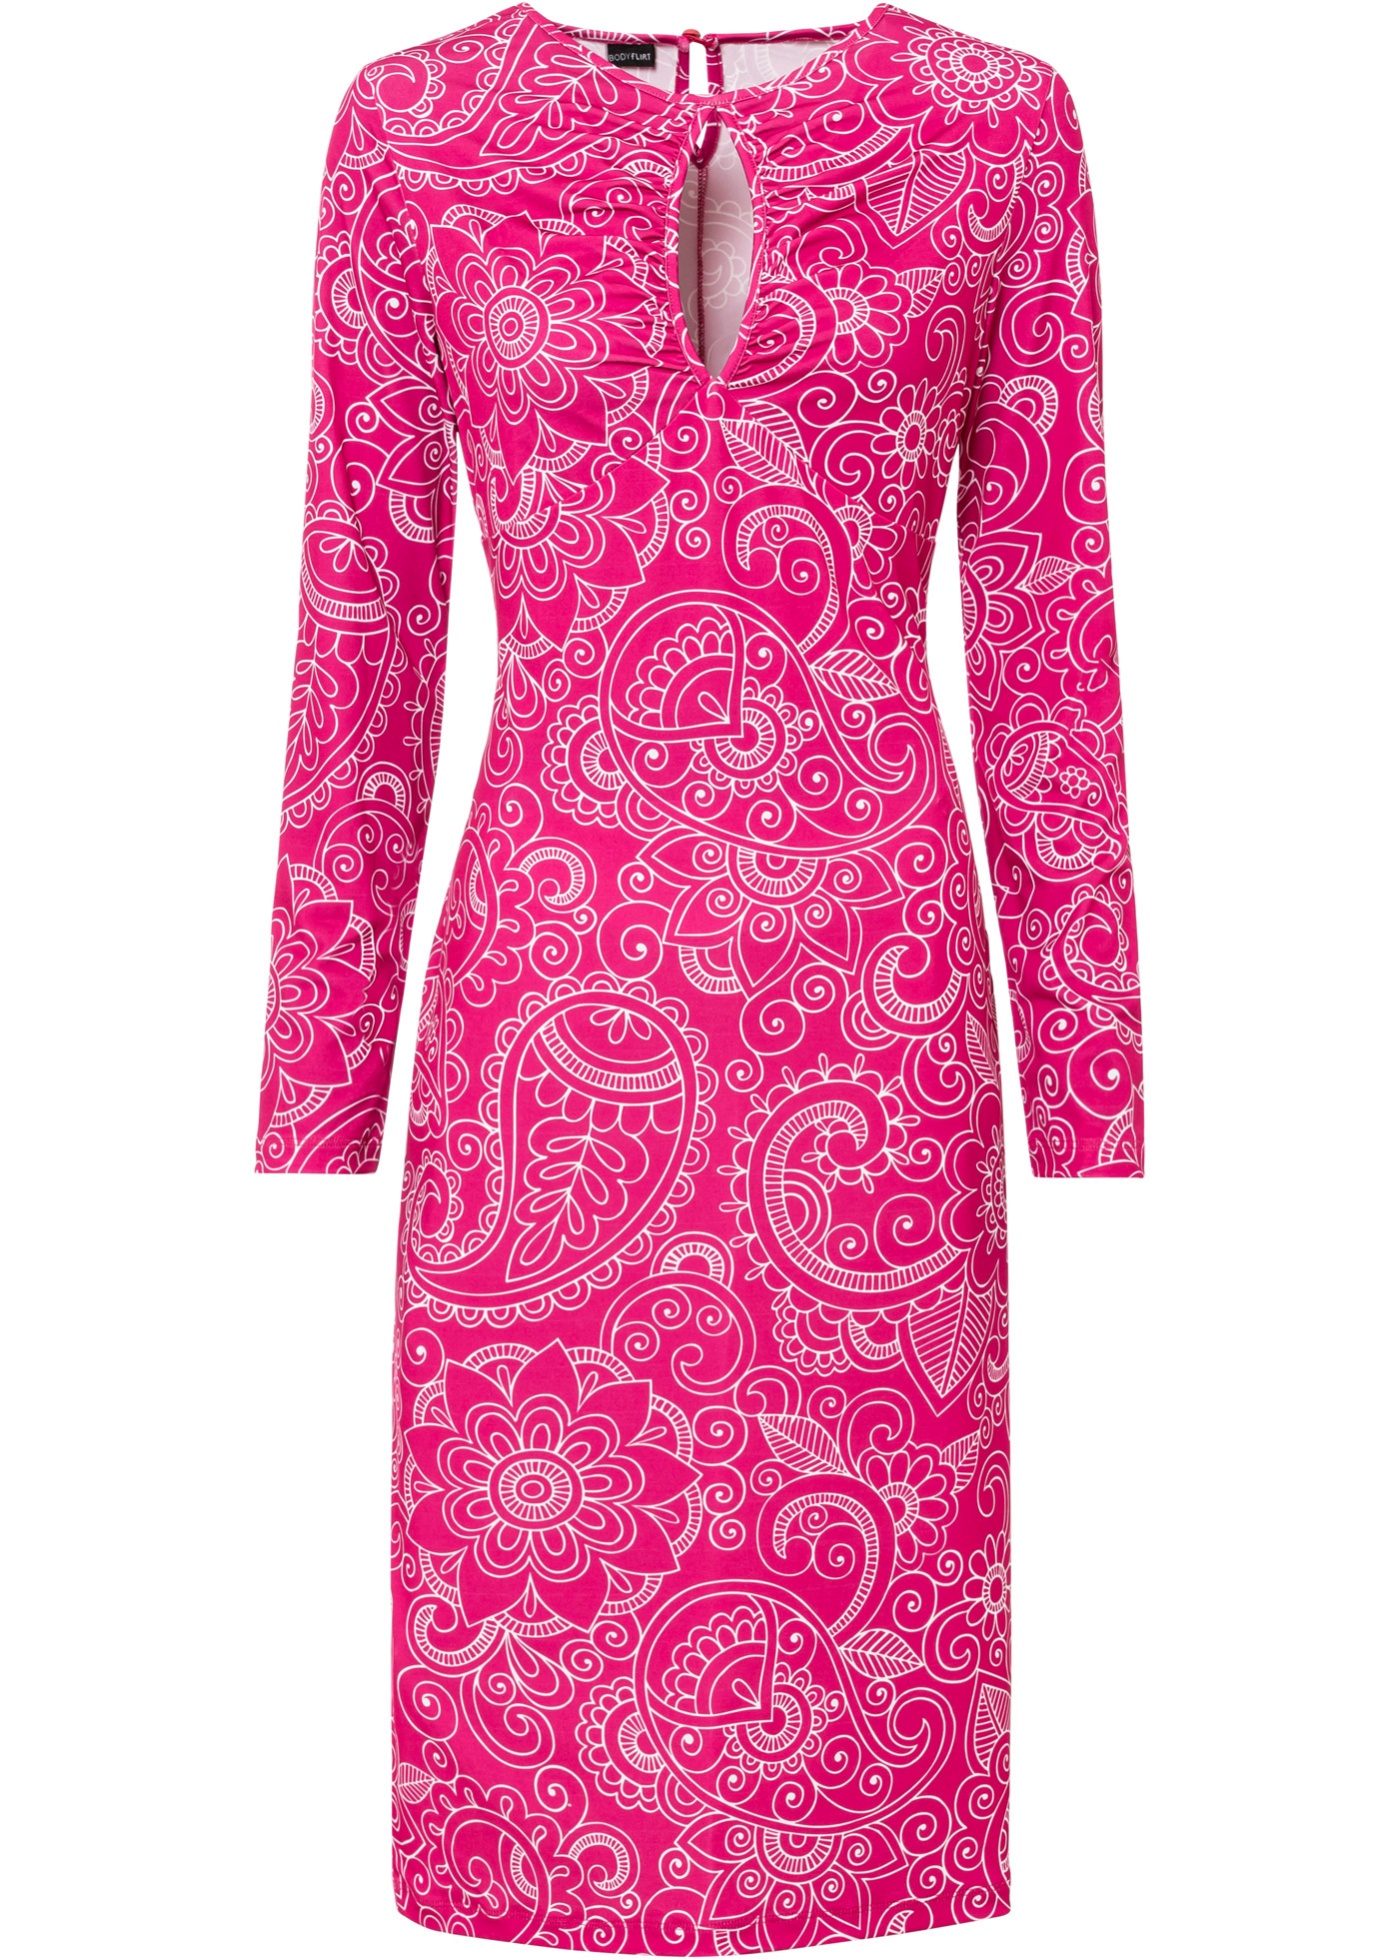 Figurbetontes Kleid mit tollem Cut-Out. (96754681) in pinklady/weiß paisley